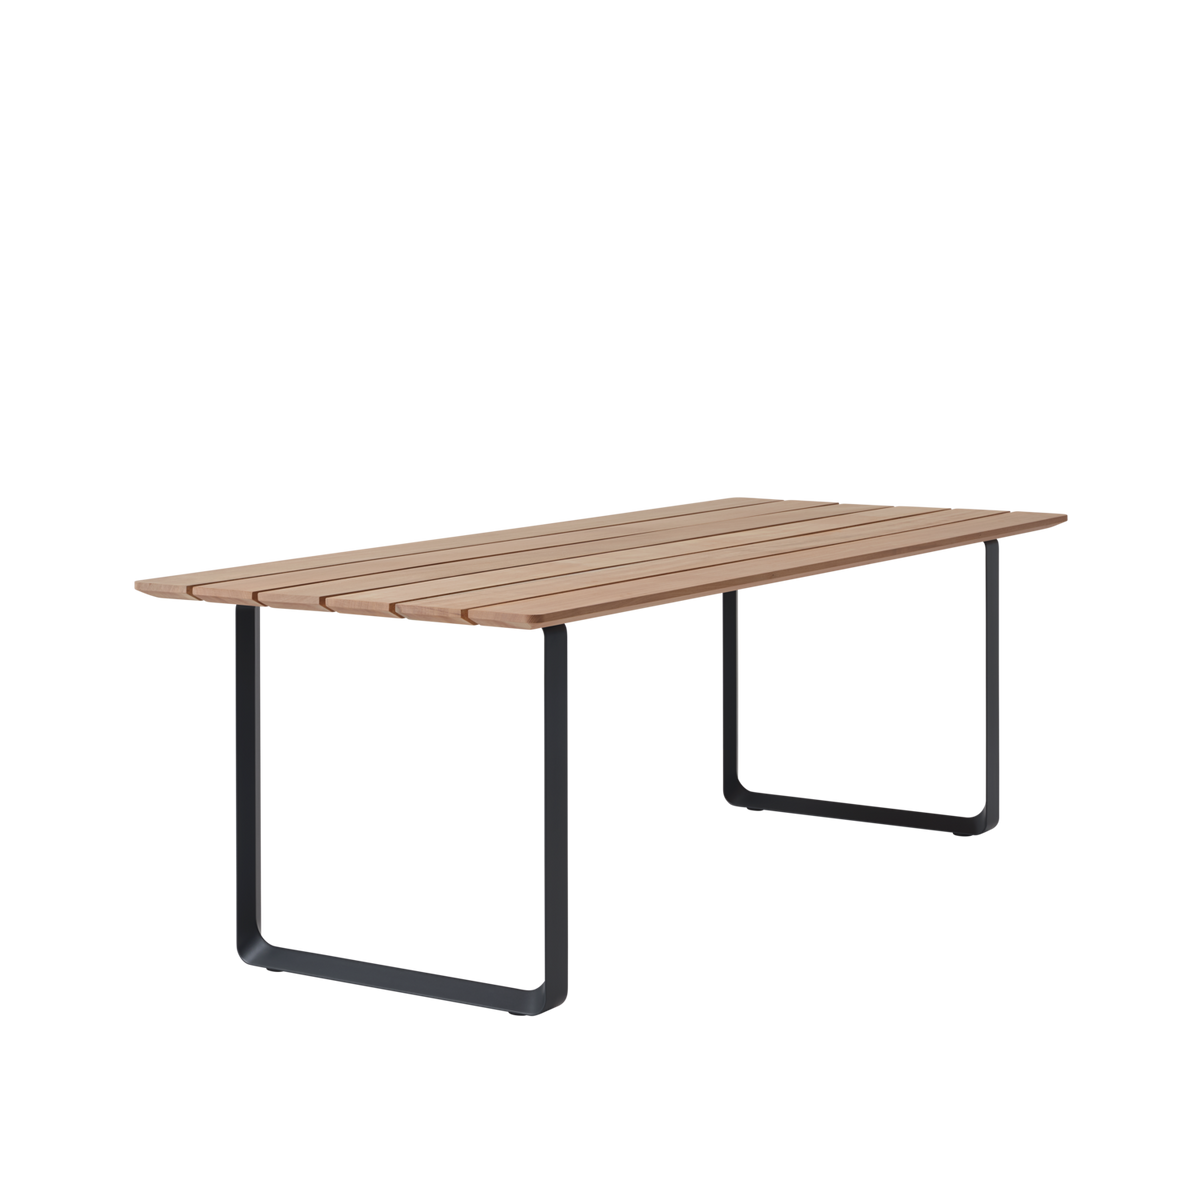 70/70 Outdoor Table by Muuto